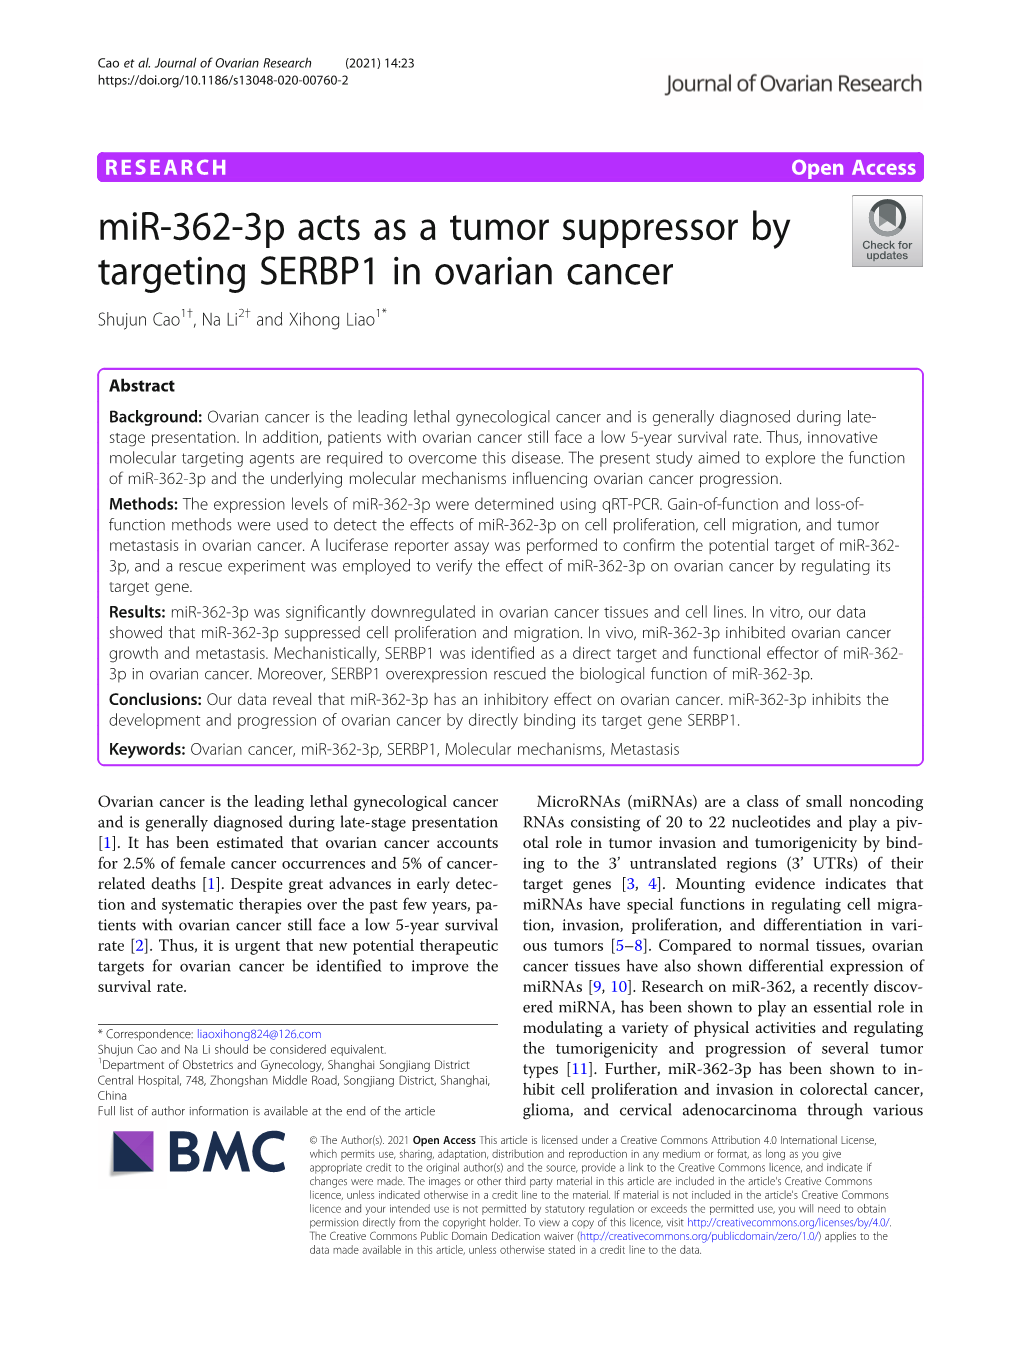 Mir-362-3P Acts As a Tumor Suppressor by Targeting SERBP1 in Ovarian Cancer Shujun Cao1†,Nali2† and Xihong Liao1*